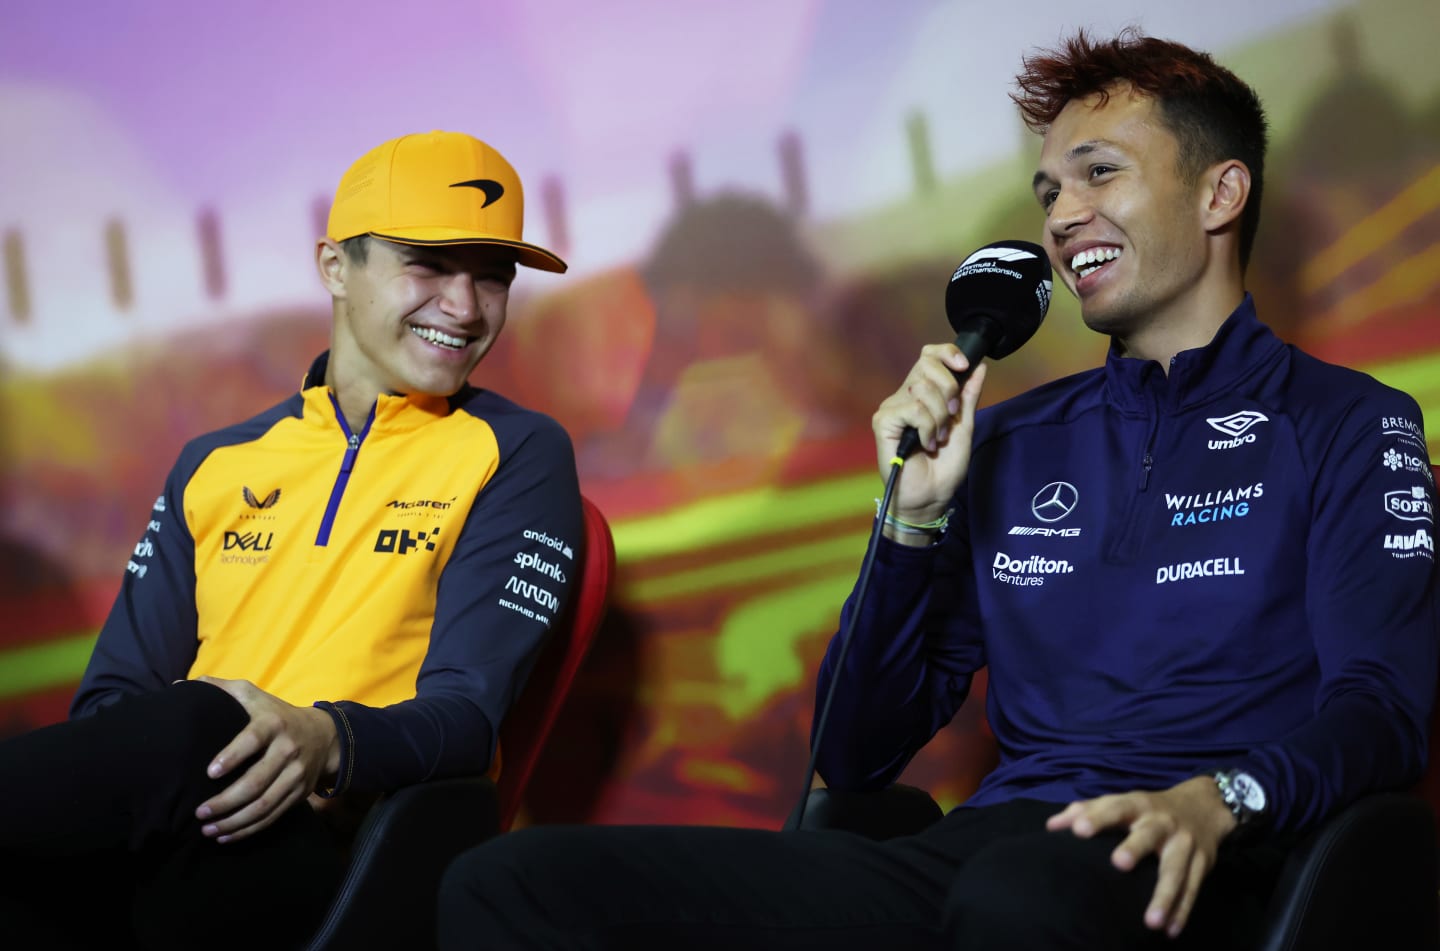 BARCELONA, SPAIN - MAY 20: Alexander Albon of Thailand and Williams and Lando Norris of Great Britain and McLaren laugh in the Drivers Press Conference prior to practice ahead of the F1 Grand Prix of Spain at Circuit de Barcelona-Catalunya on May 20, 2022 in Barcelona, Spain. (Photo by Bryn Lennon/Getty Images)